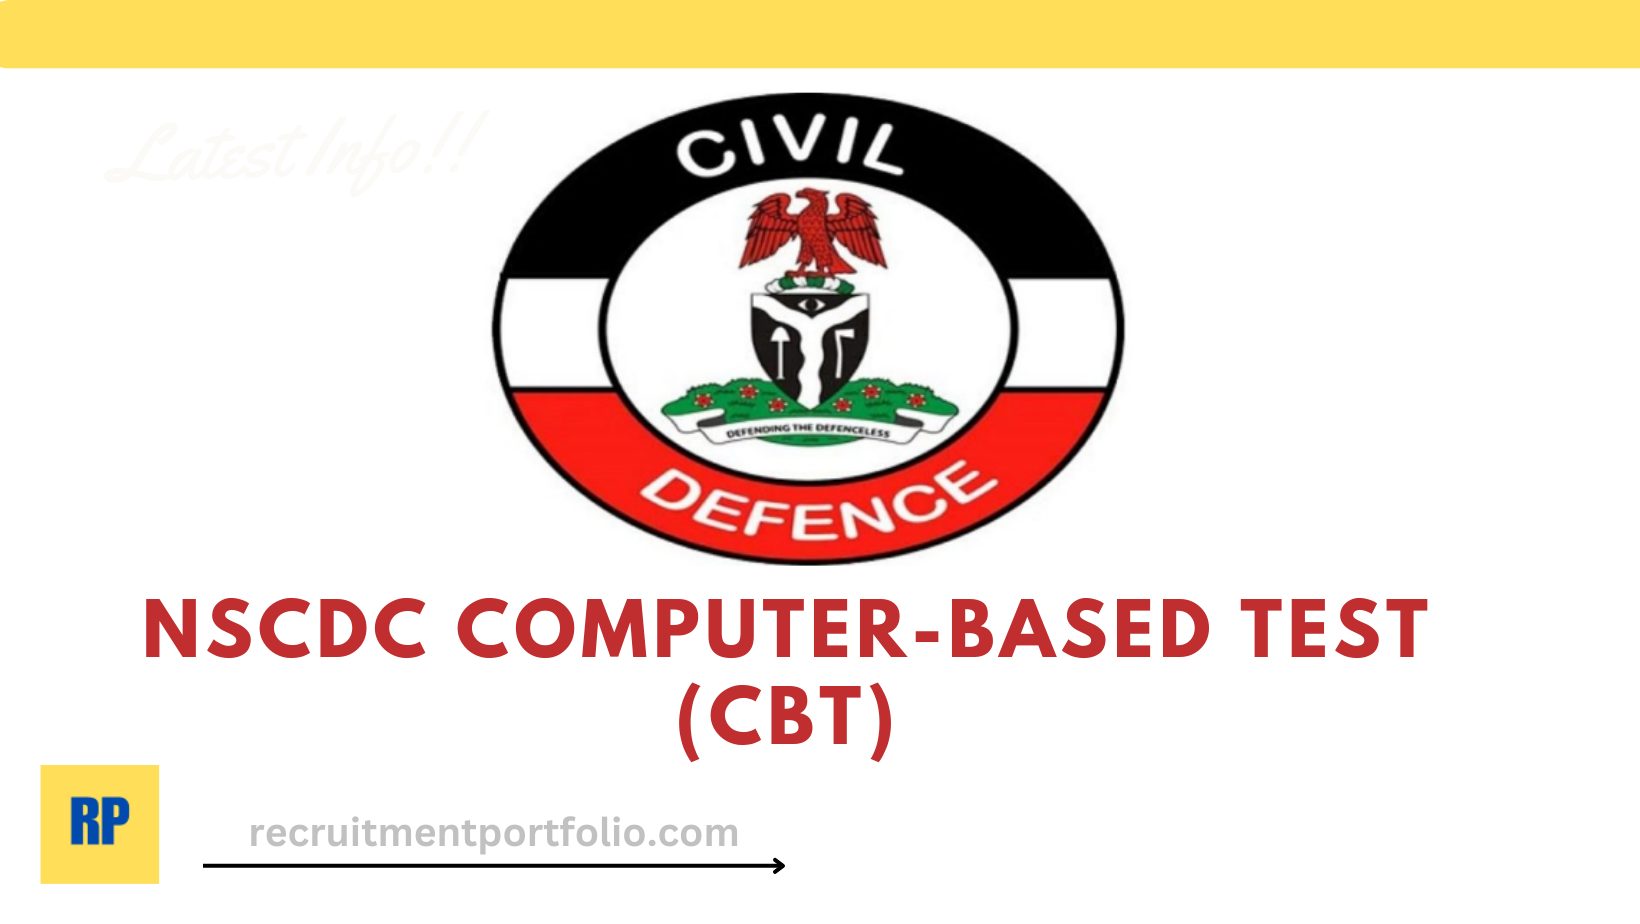 NSCDC Computer-Based Test